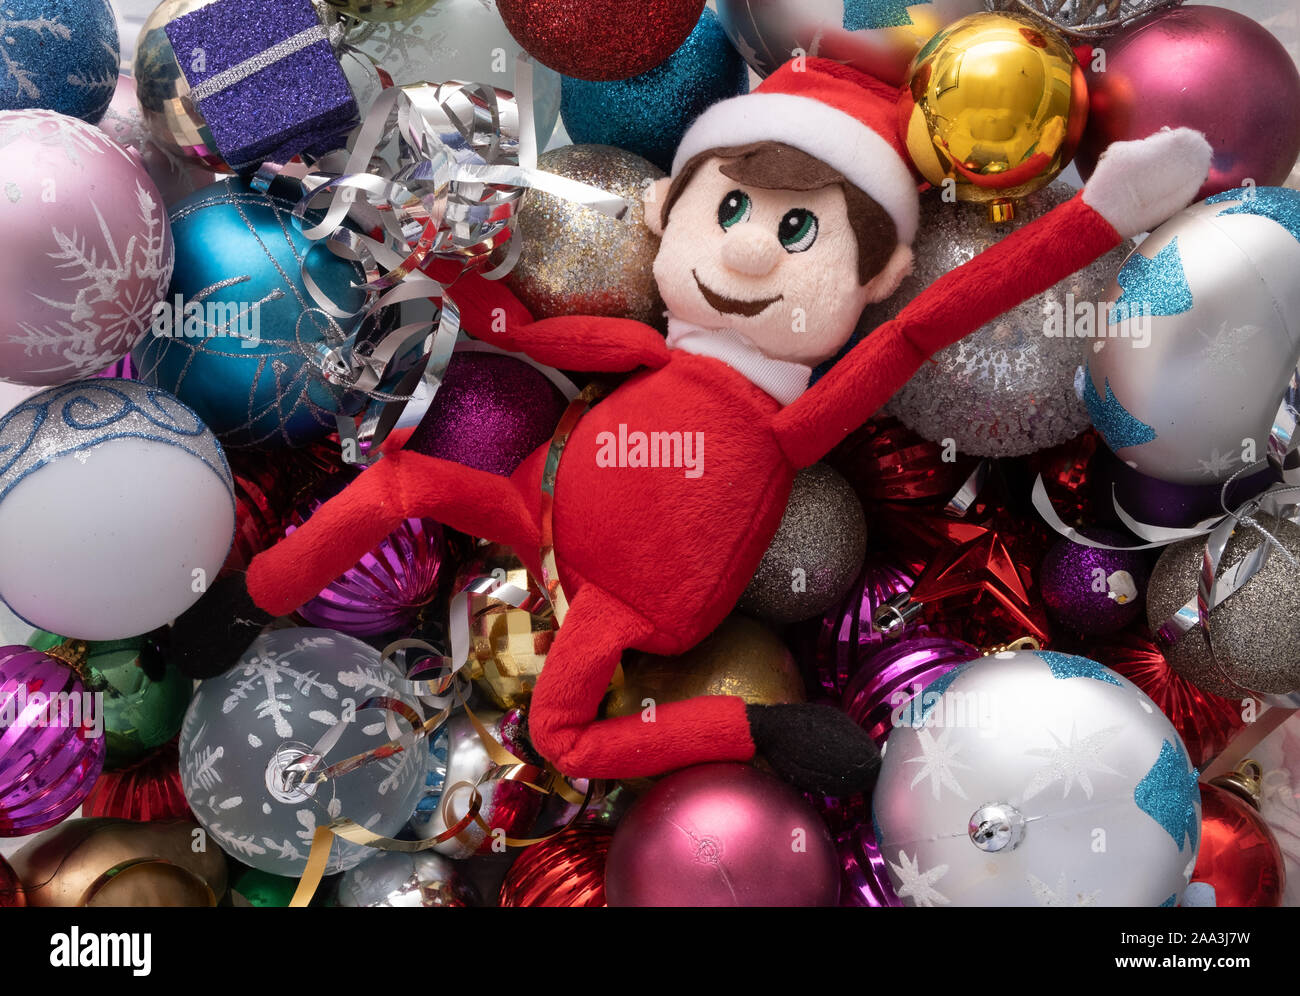 Elf on the shelf being naughty playing in a ball pond of christmas baubles. Cute tradition of sending Santa's elf to check up on children just before Stock Photo